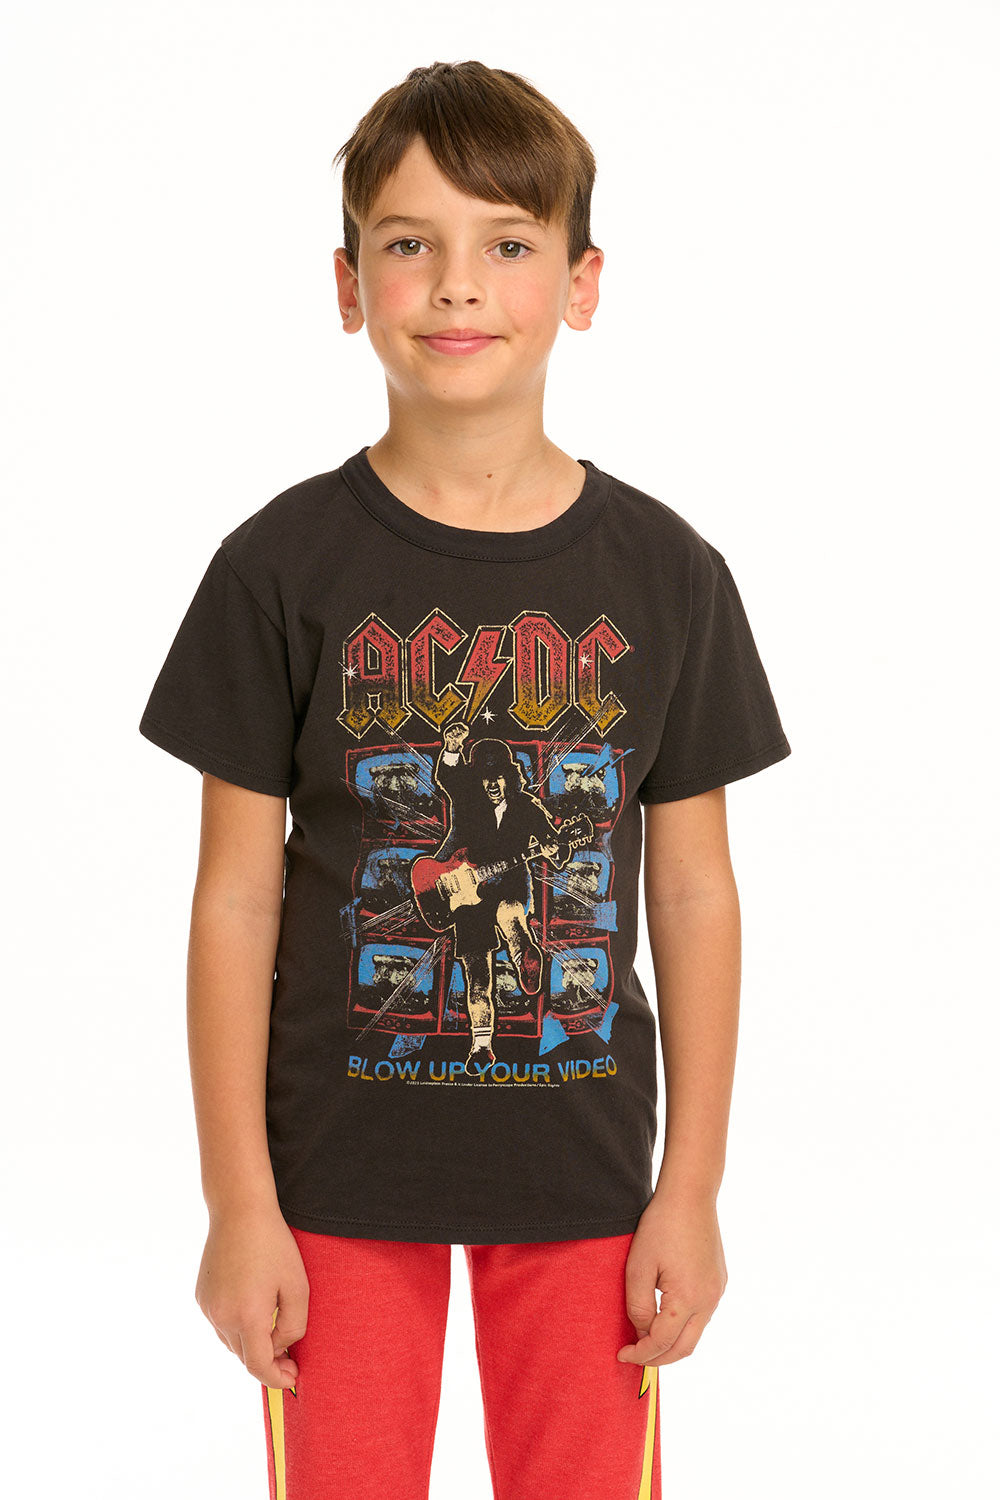 AC/DC  - Blow Up Your Video Tee BOYS chaserbrand